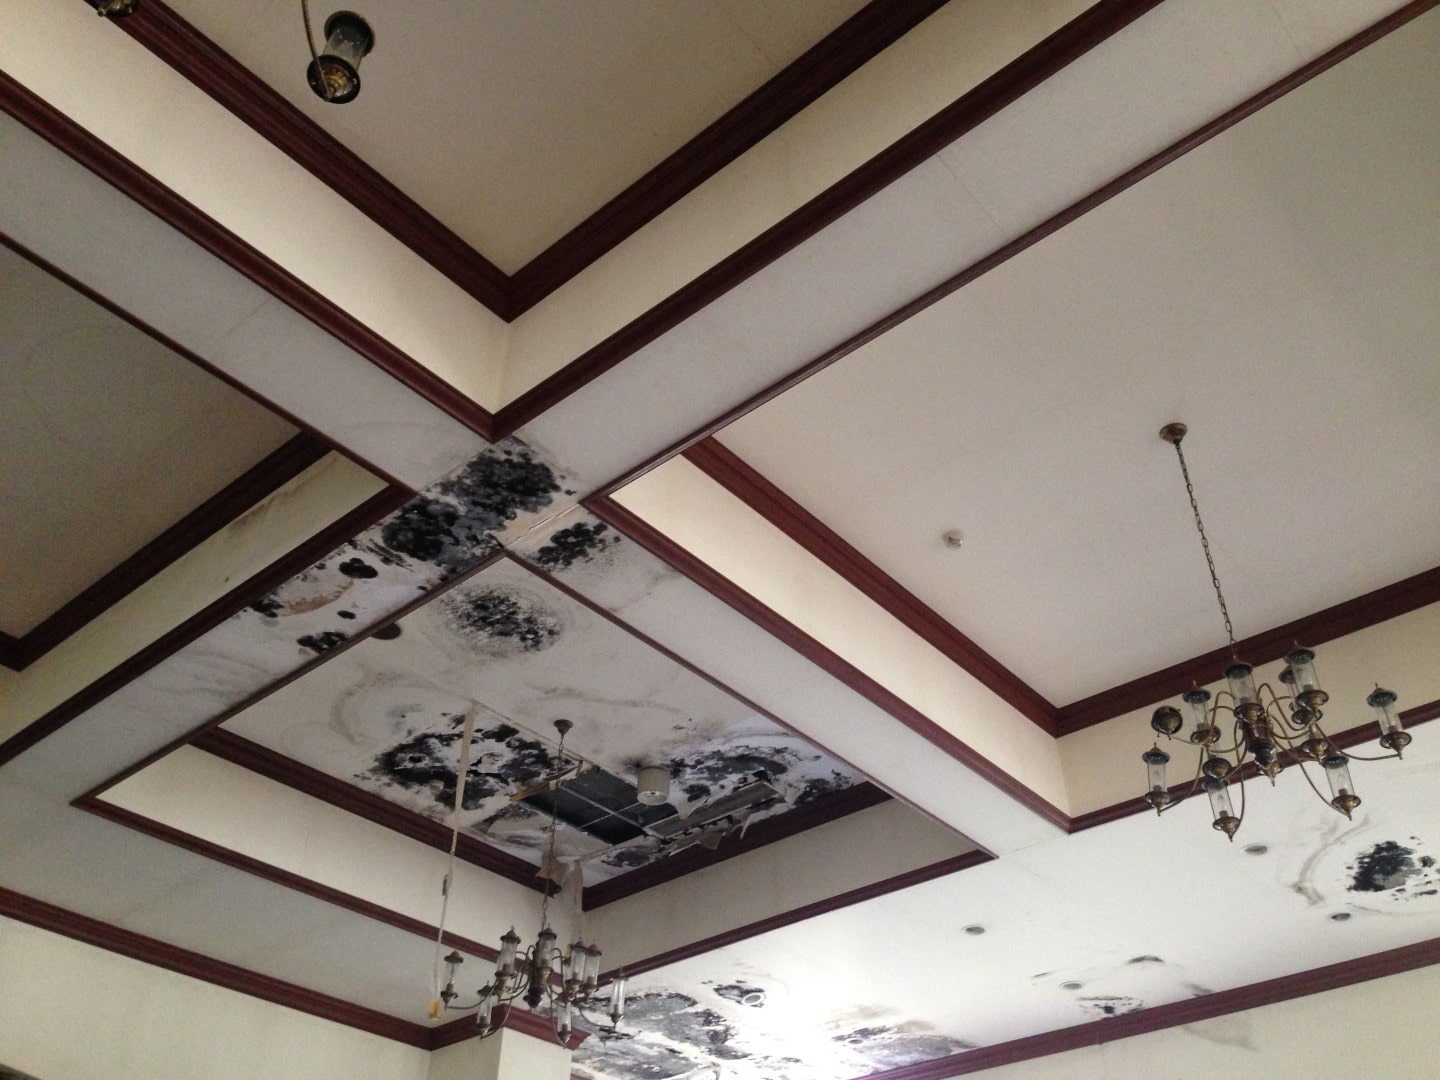 mouldy ceiling and hanging lights